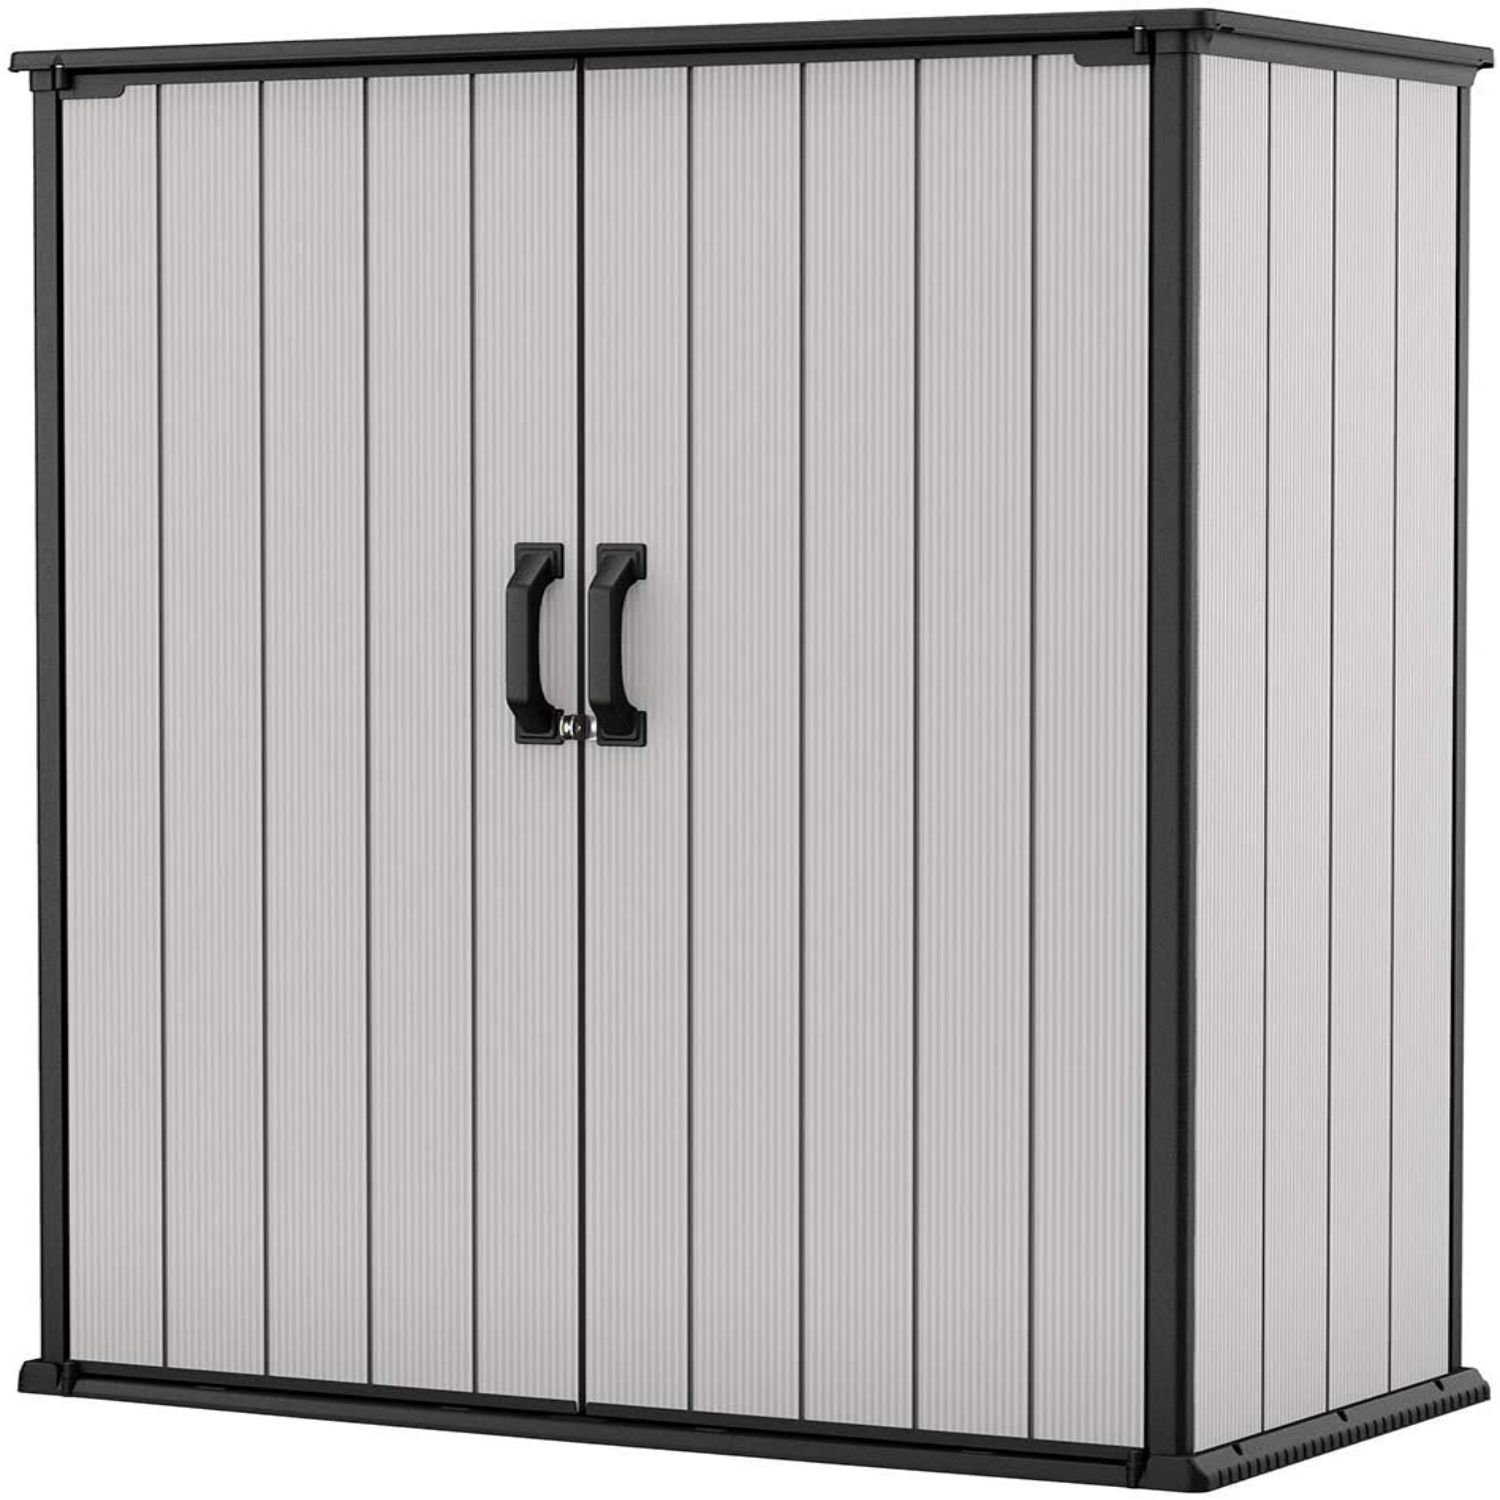 Keter Premier Tall 4.6x5.6 ft. Vertical Resin Outdoor Storage Shed for  Patio Furniture and Tools & Reviews